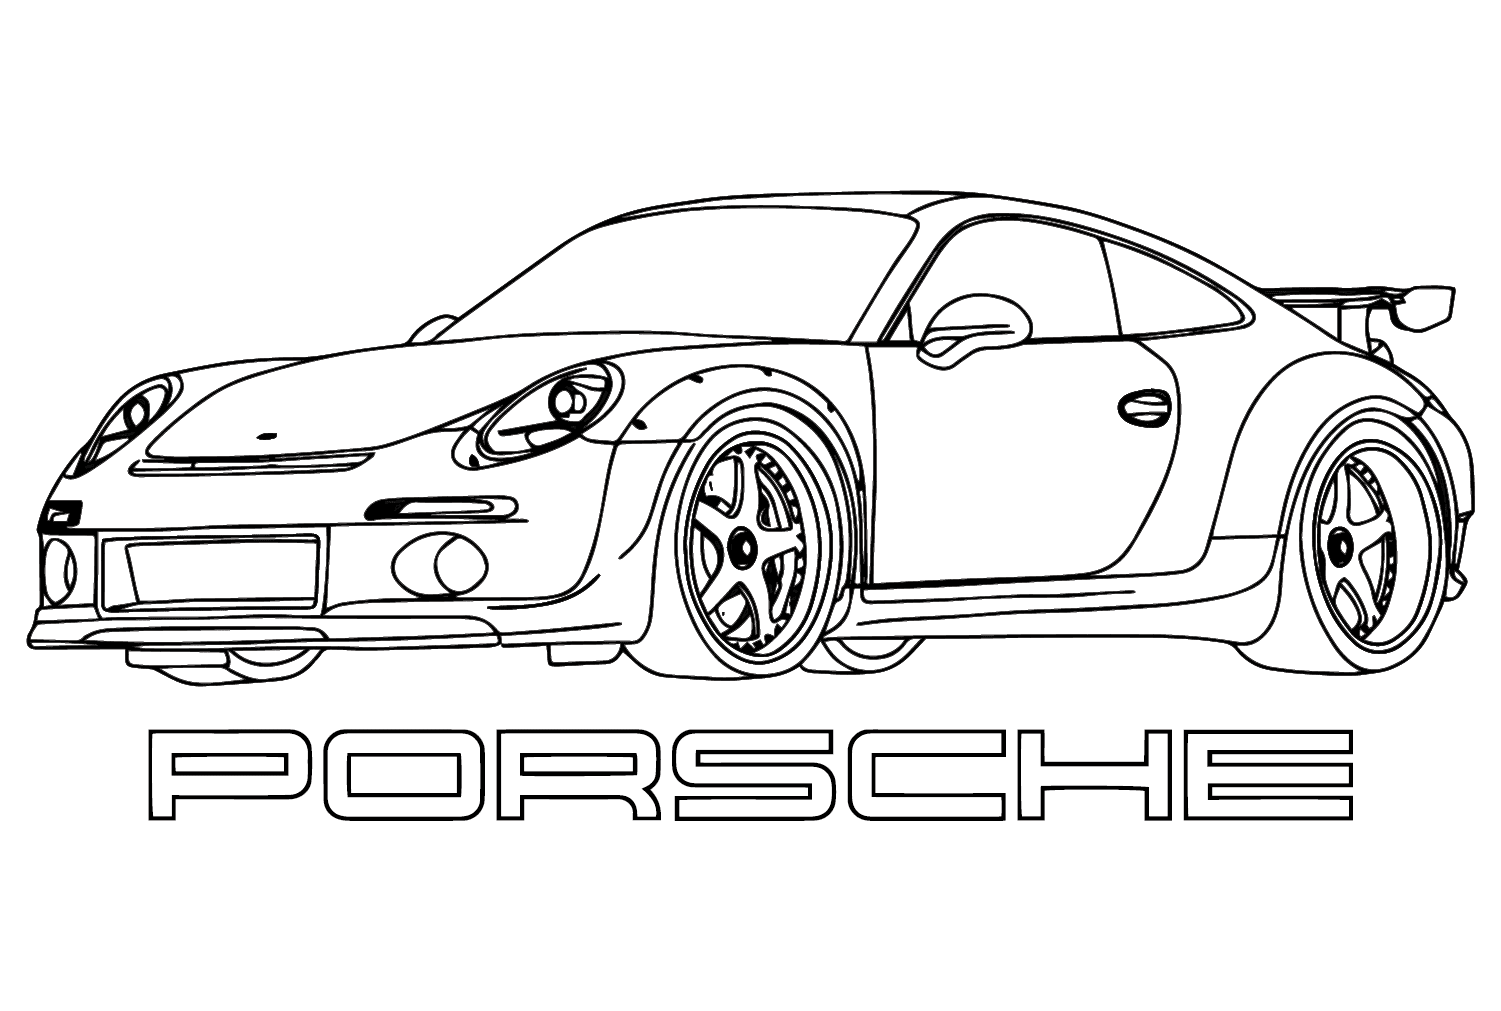 RUF 911 RGT Coloring Page from Porsche